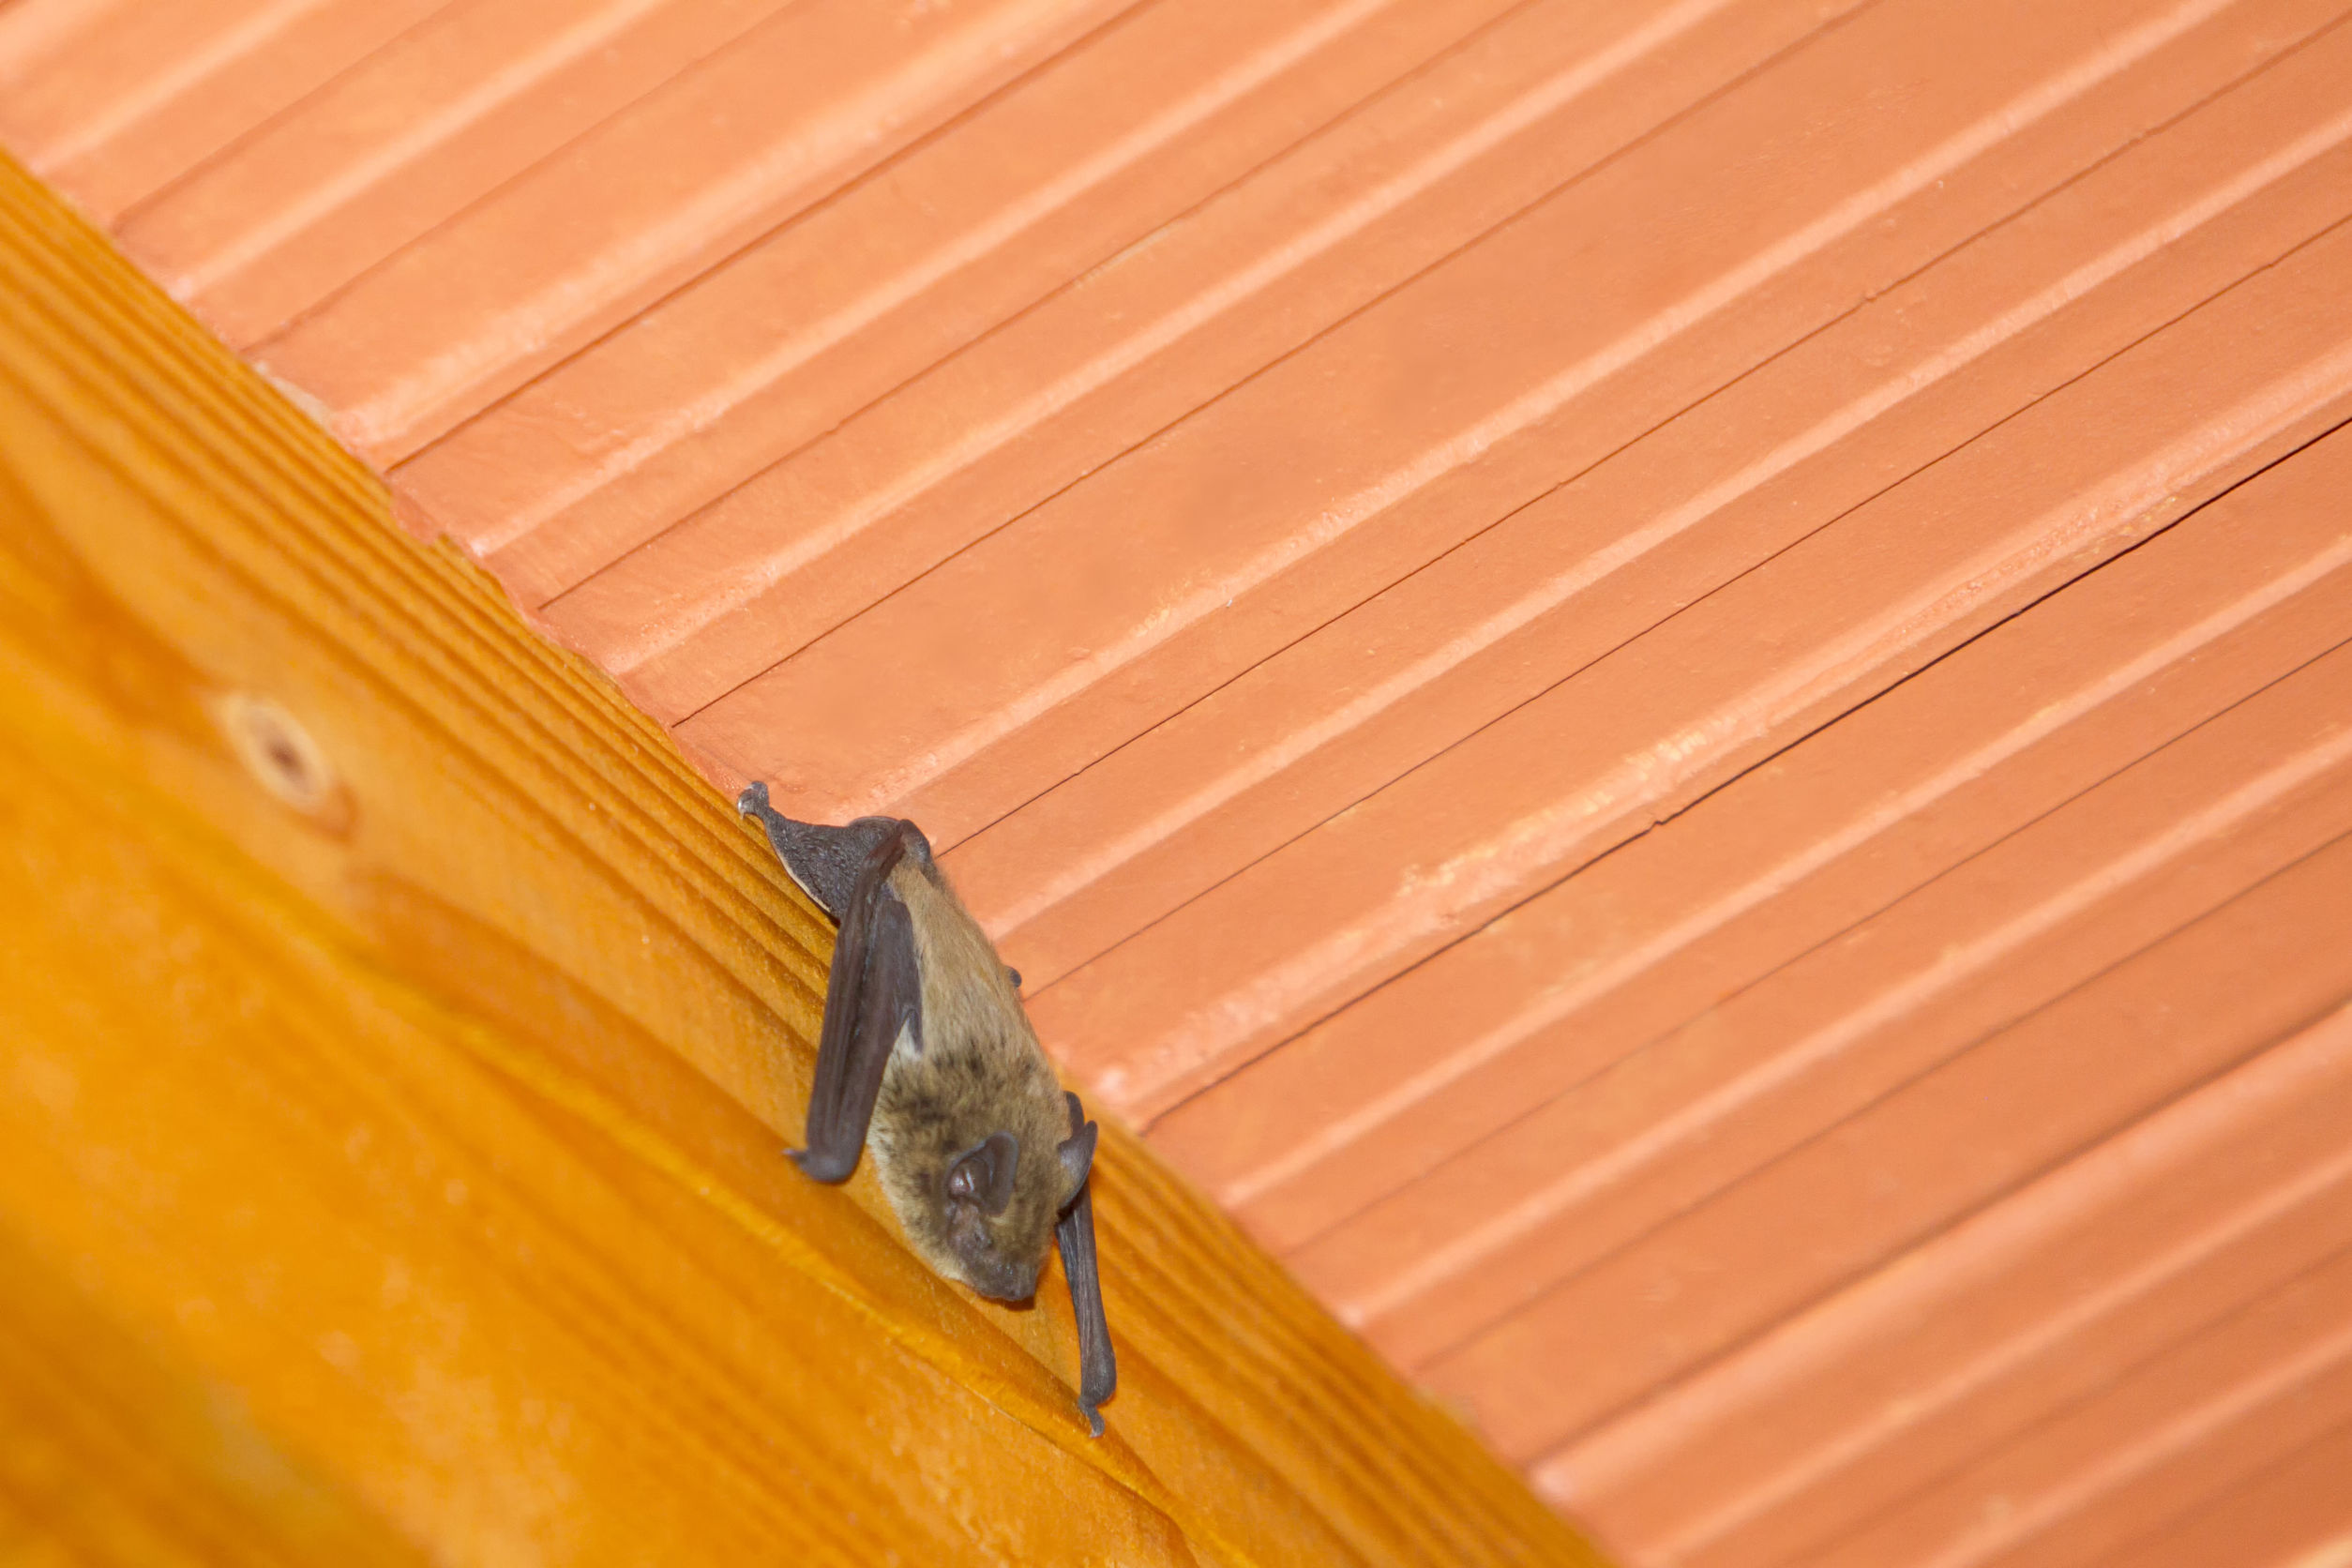 BAT REMOVAL VIRGINIA - Wildlife Removal Experts Get Rid of Bats from Homes - How To Get A Bat Out Of The House